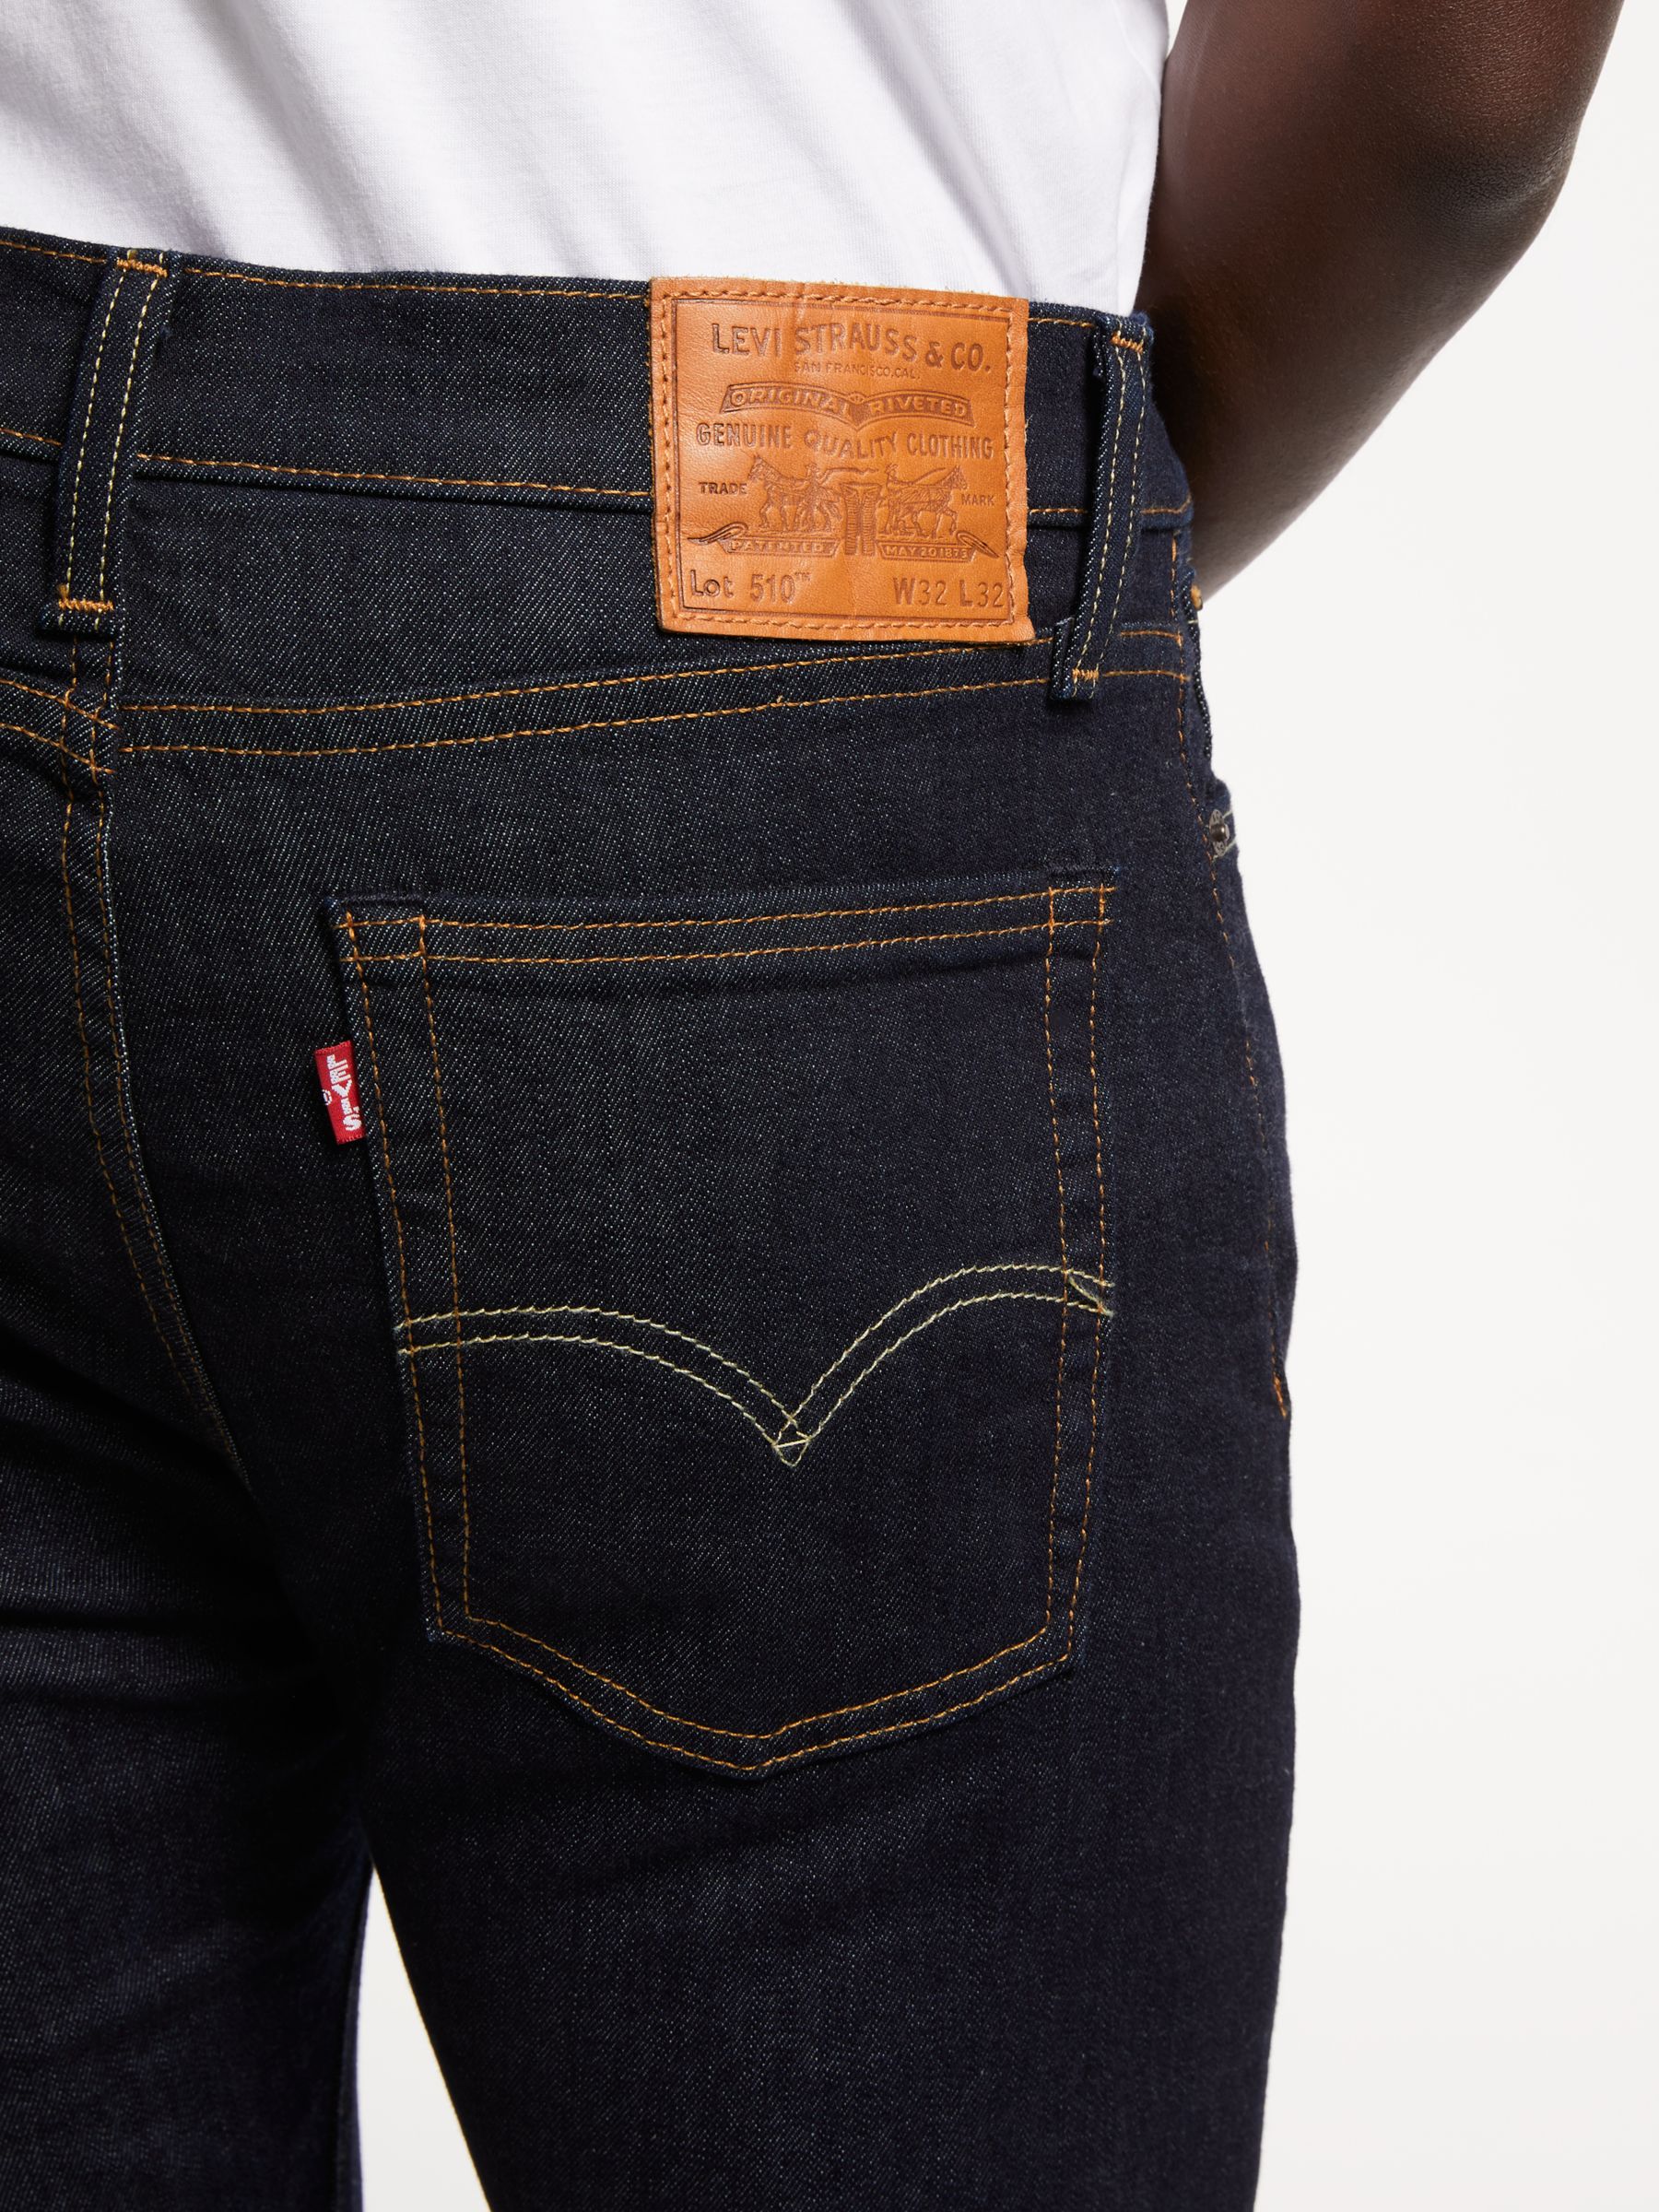 levi's 510 skinny fit jeans cleaner 